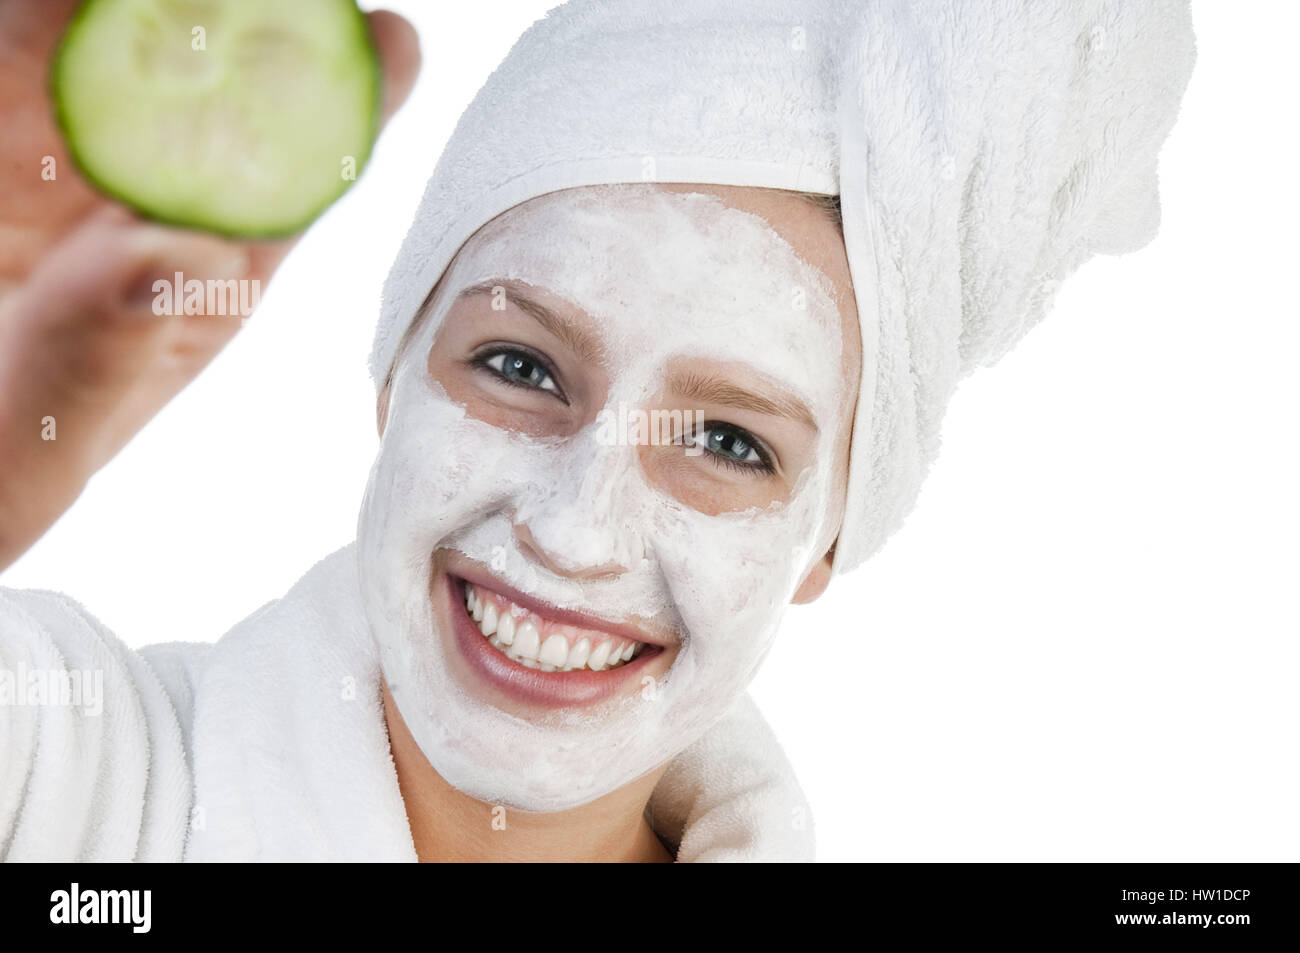 Beauty care, Schˆnheitspflege Stock Photo